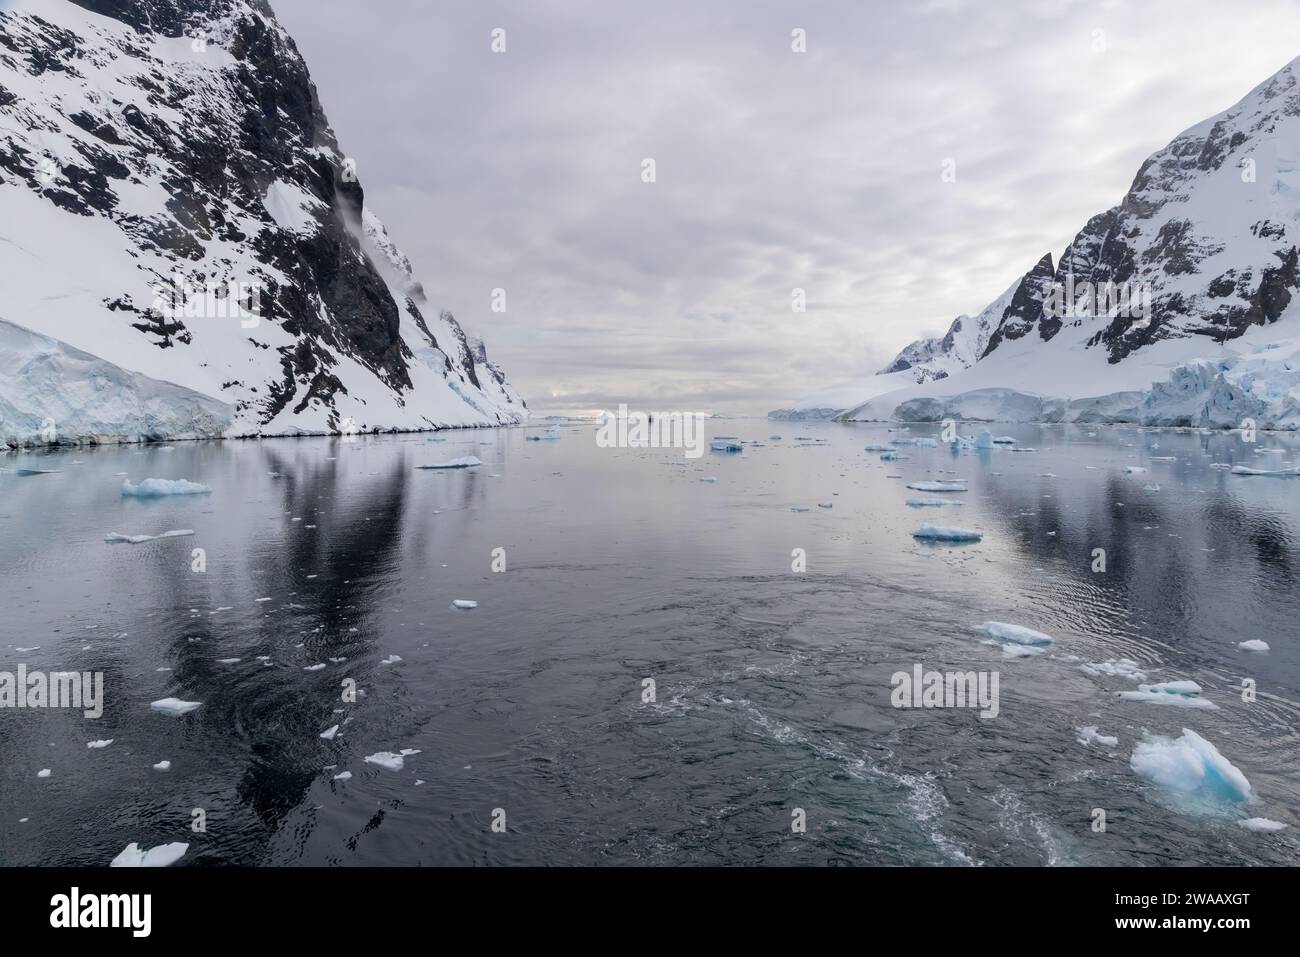 Ship coming through the Lemaire Channel in Antartica. It is very small compared to the scenery. Stock Photo